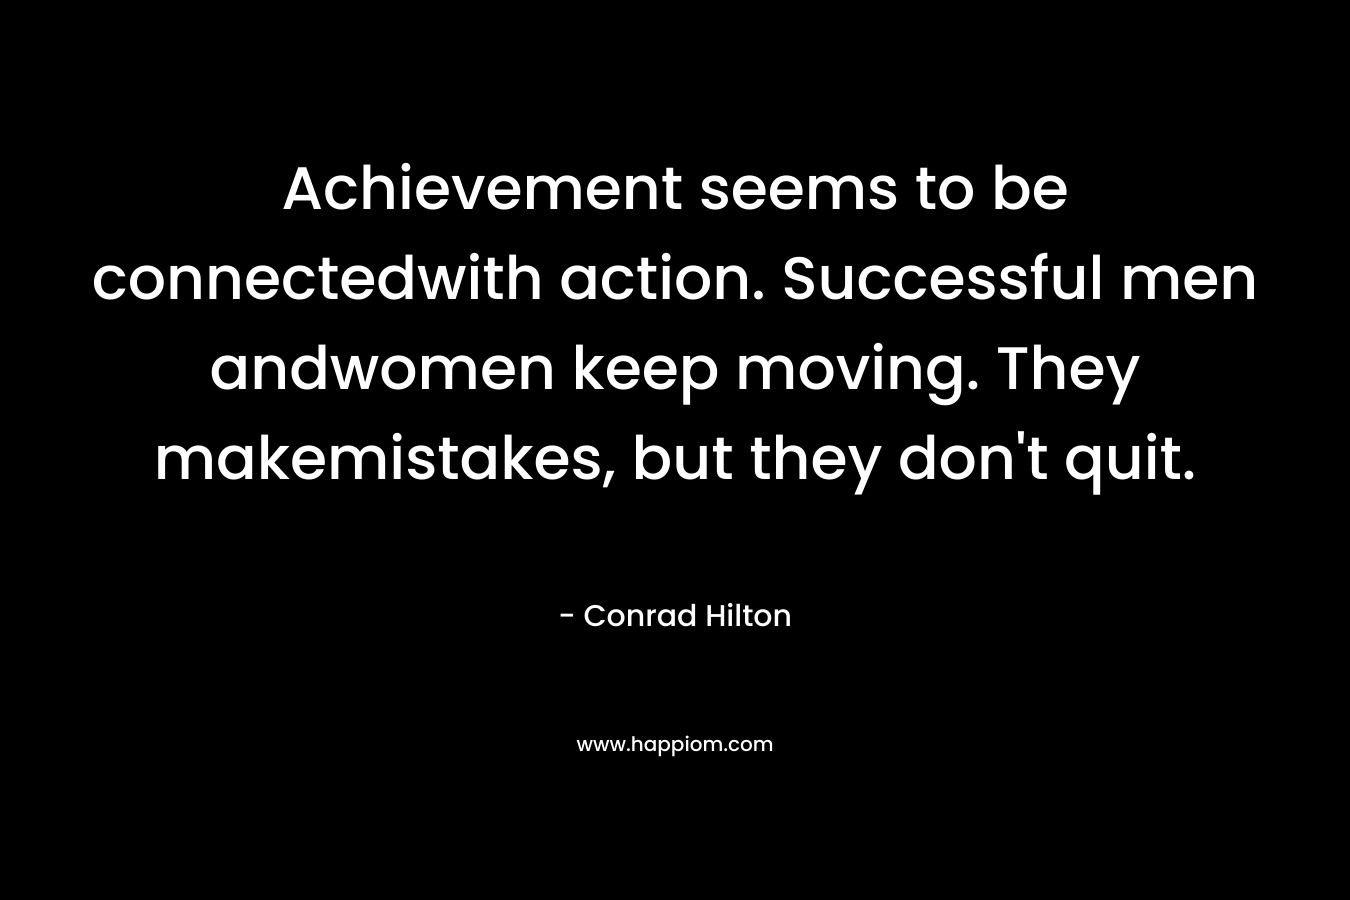 Achievement seems to be connectedwith action. Successful men andwomen keep moving. They makemistakes, but they don’t quit. – Conrad Hilton